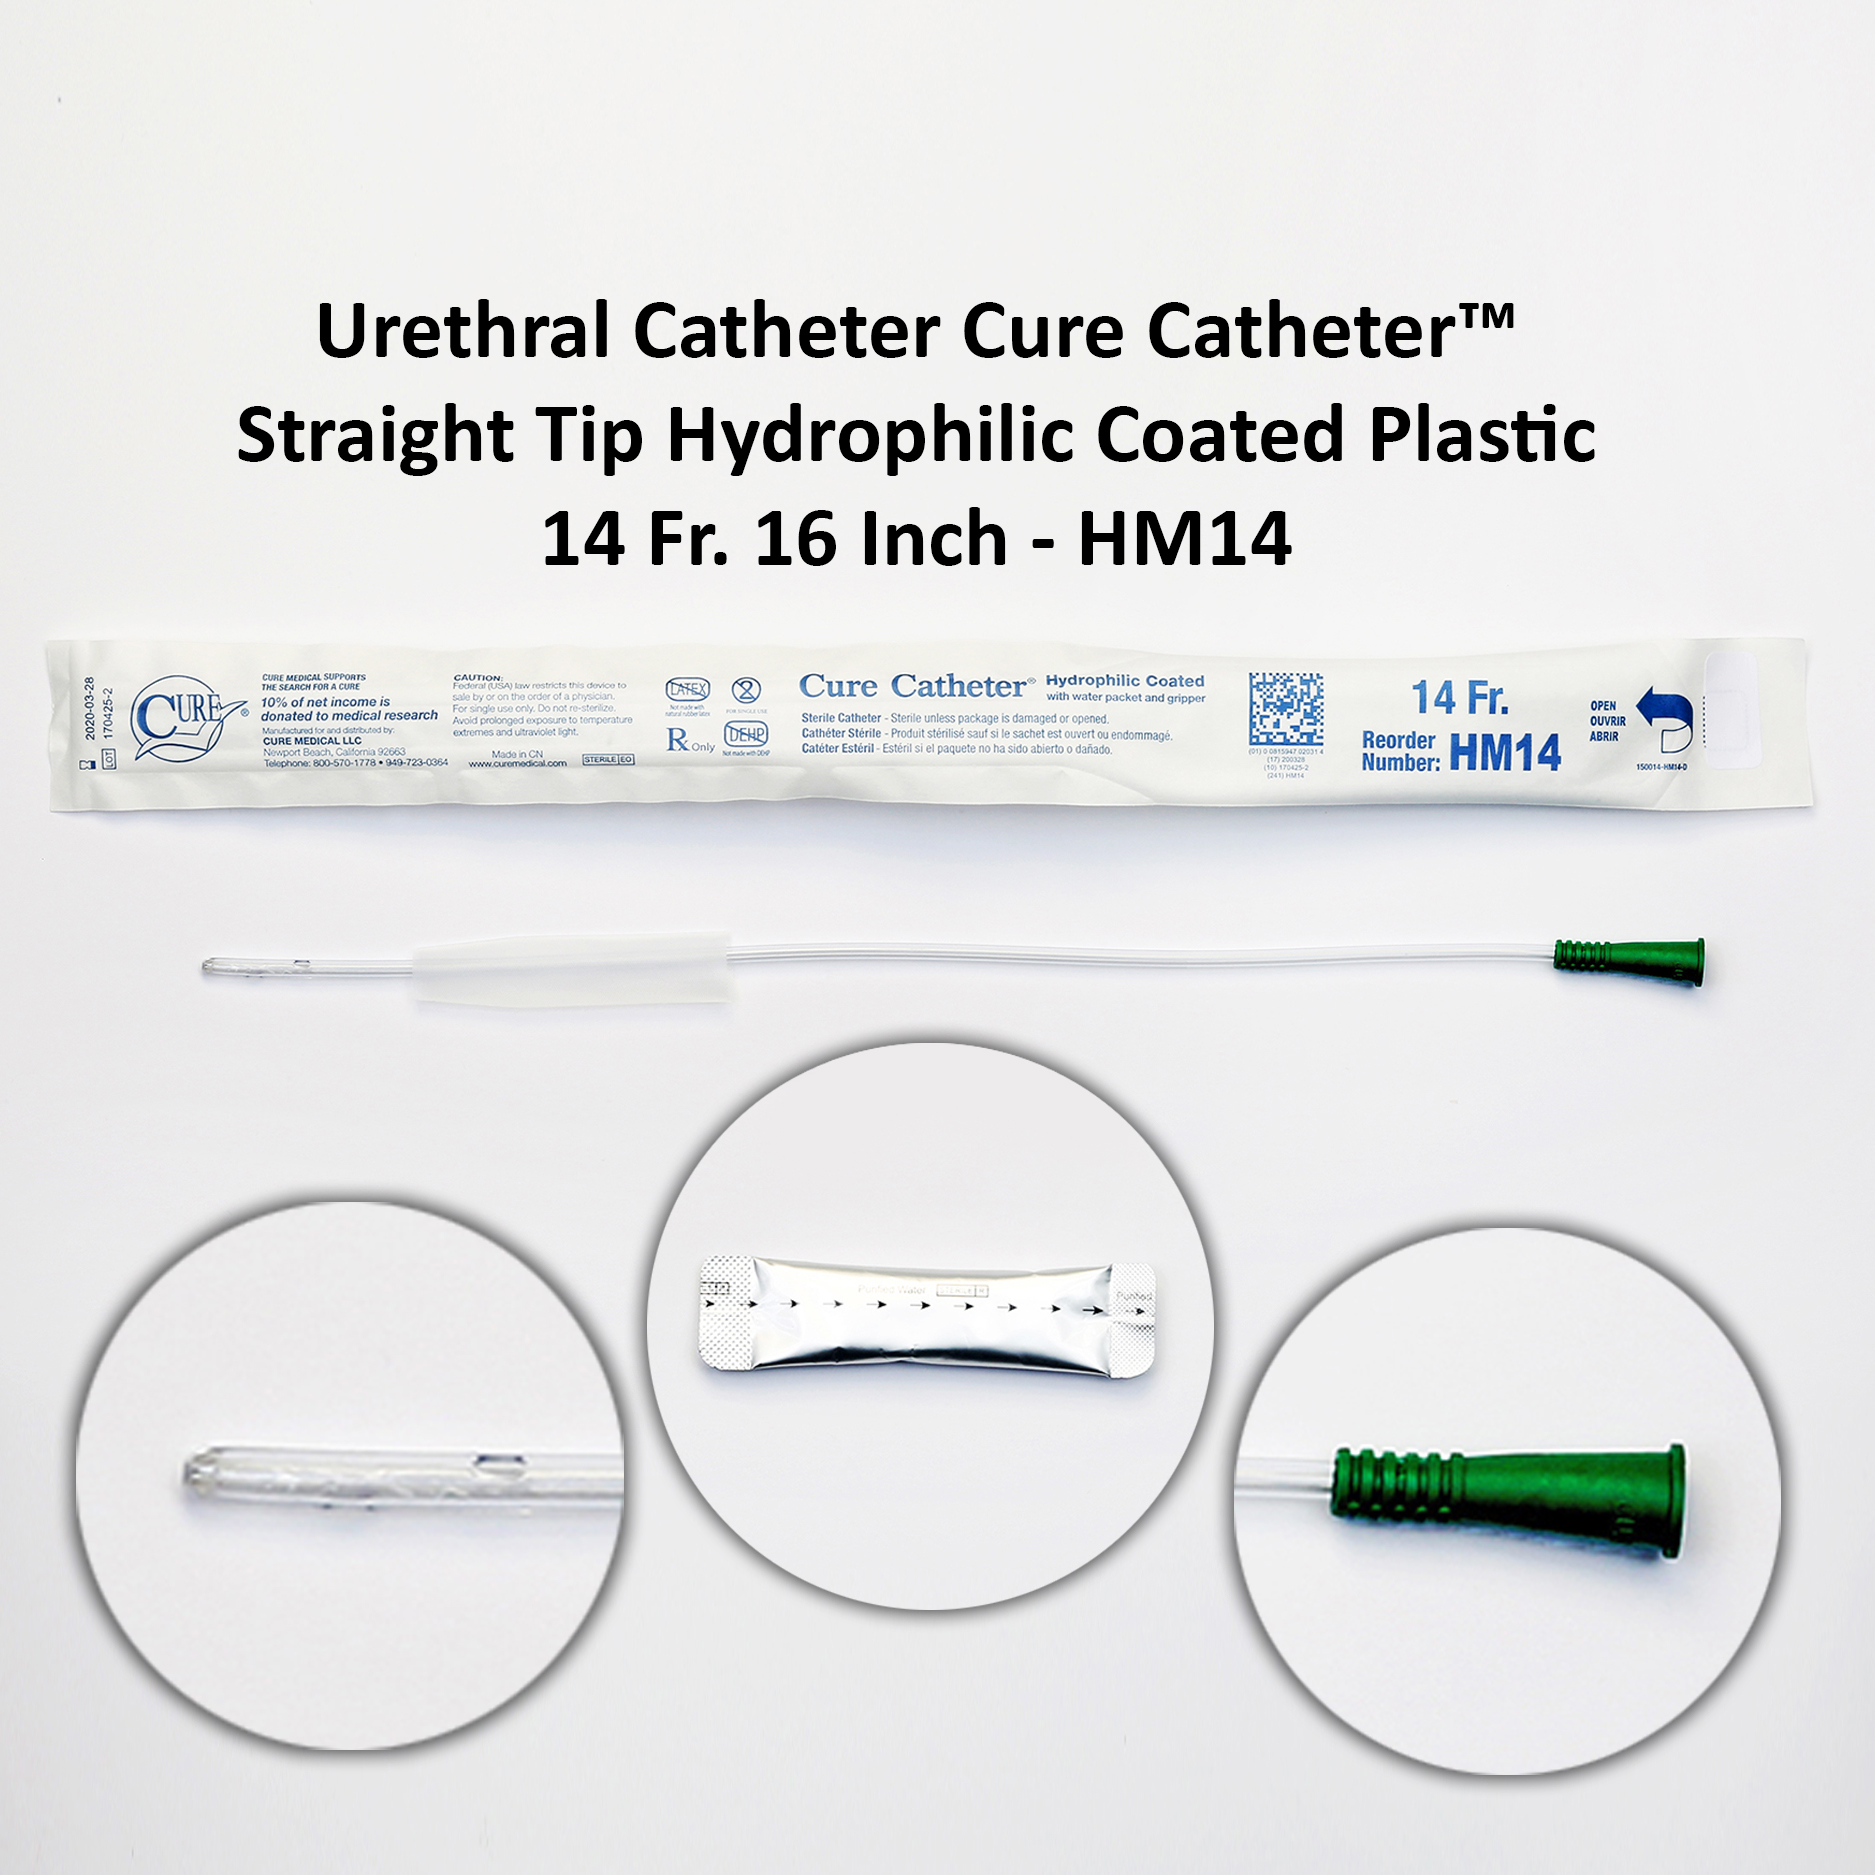 Urethral Catheter Cure Catheter™ Straight Tip Hydrophilic Coated Plastic 14 Fr. 16 Inch - HM14